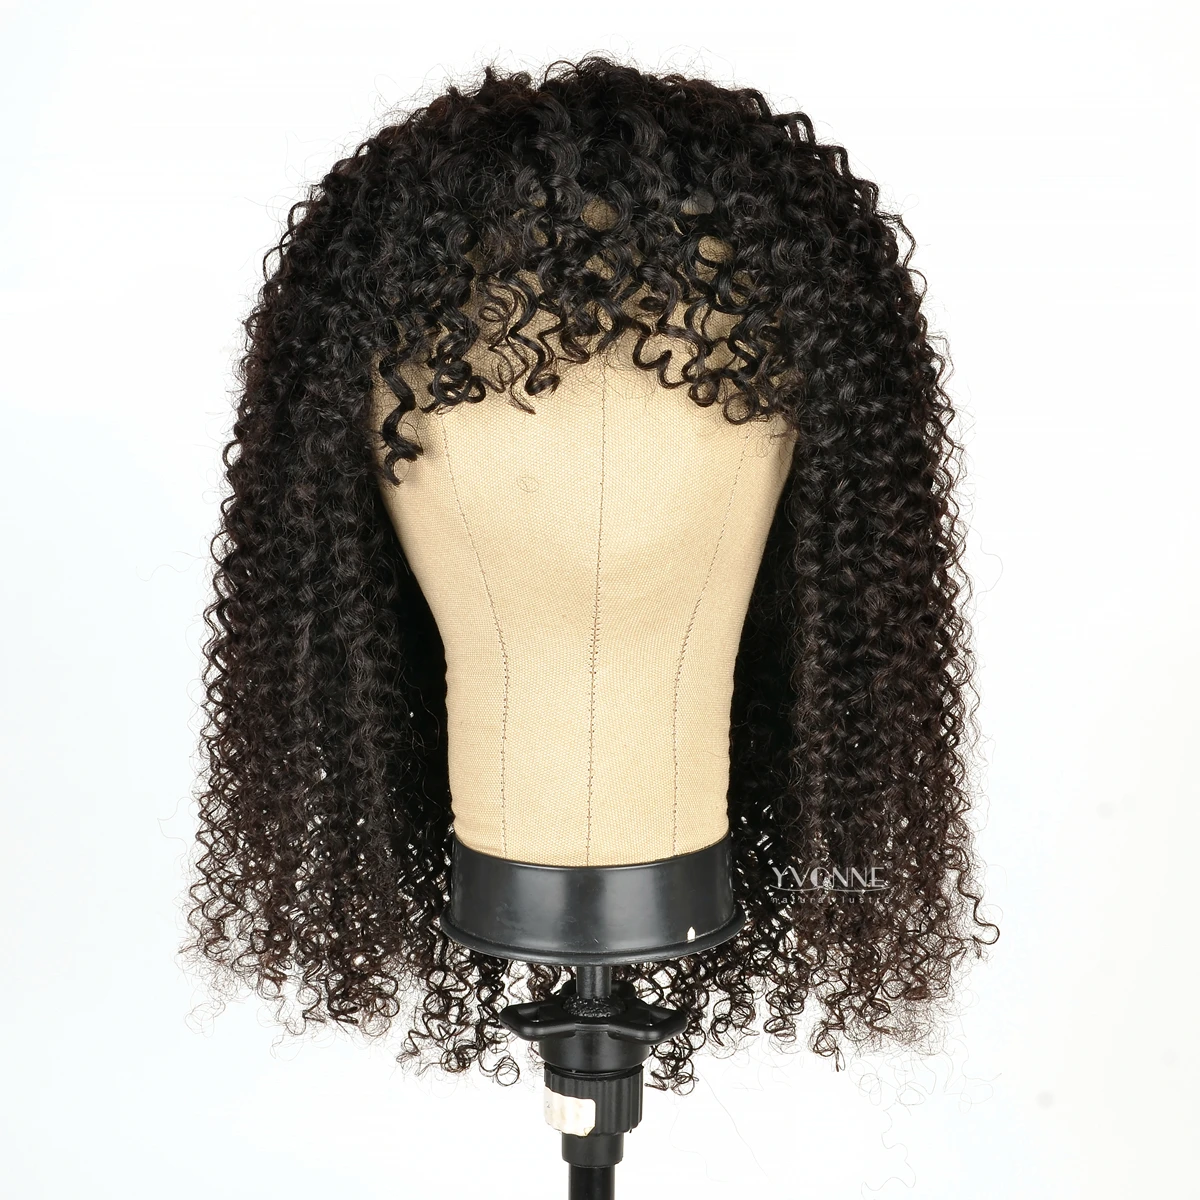 

YVONNE Much Fuller Machine Made Wigs Malaysian curly 100% Human Hair wigs 20inch for black women, Natural color lace wig